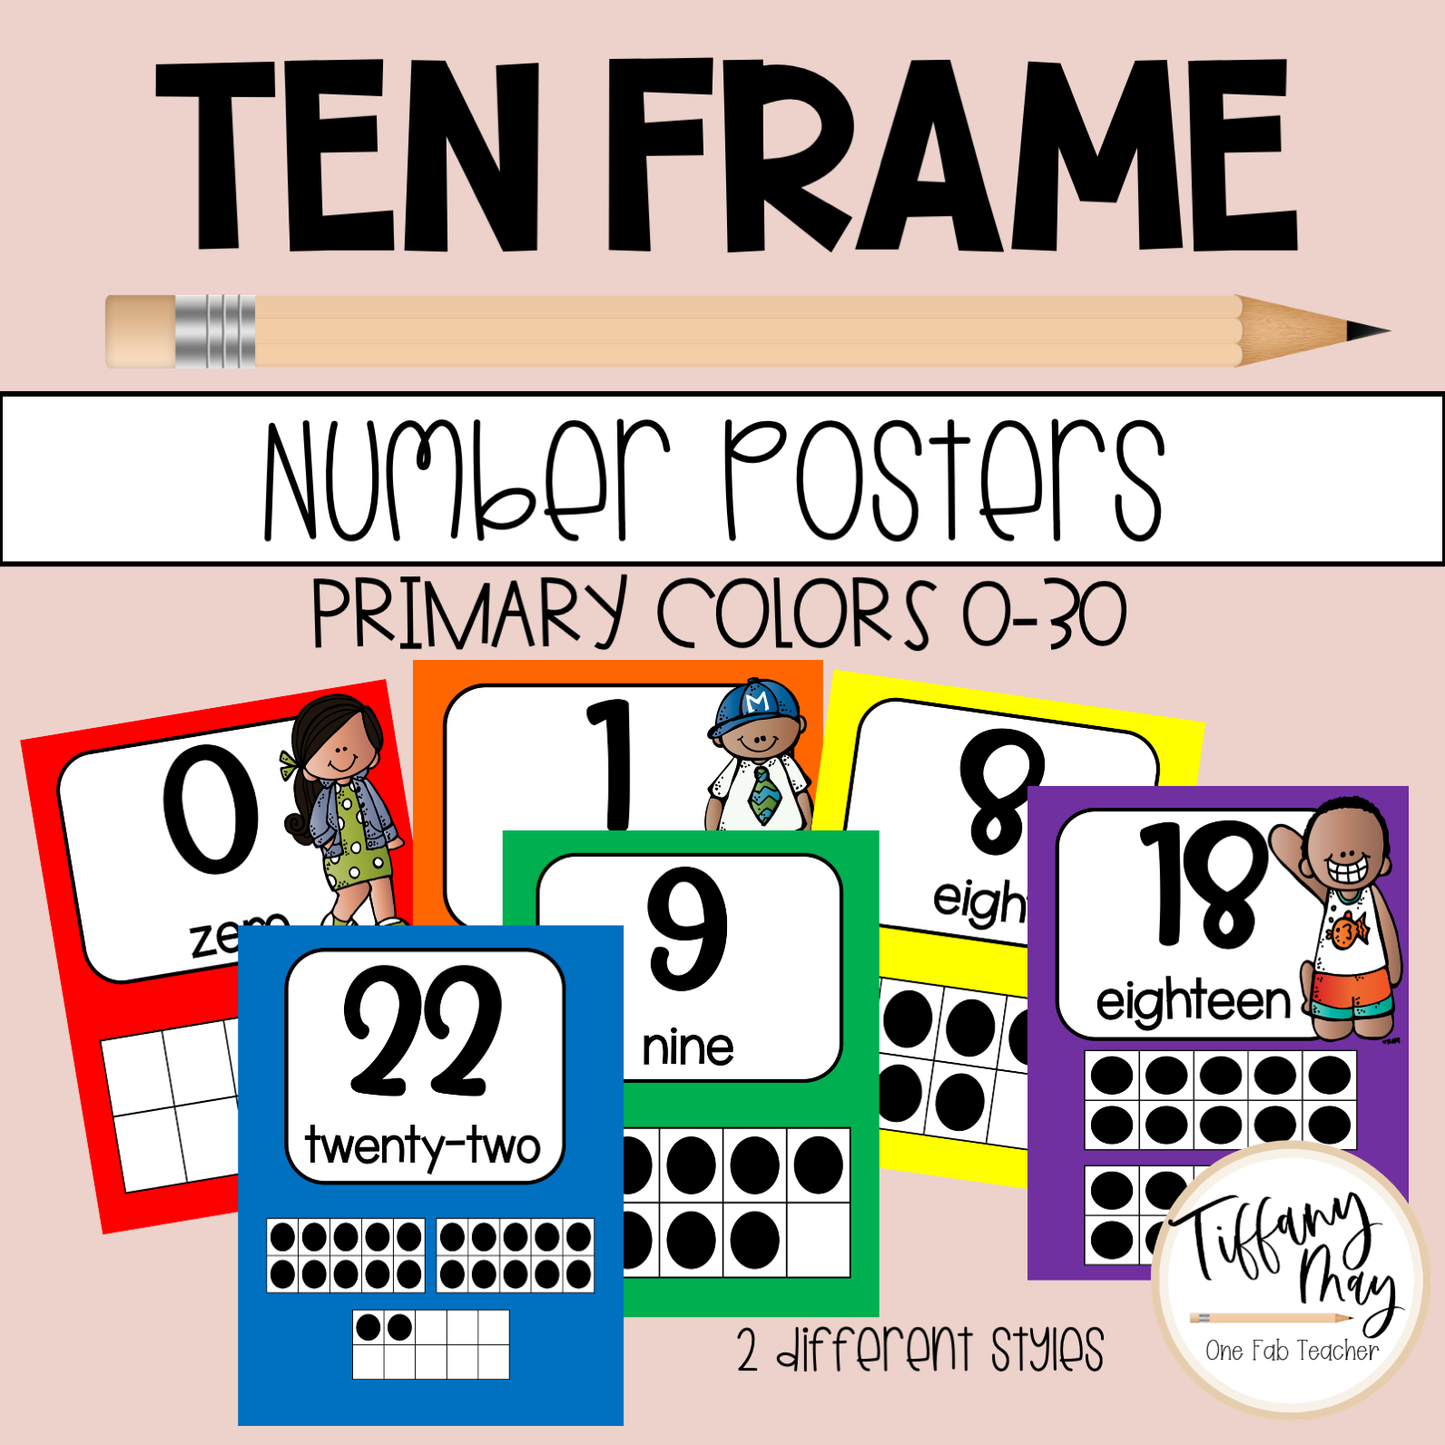 Ten Frame Posters | Primary Colors 0-30